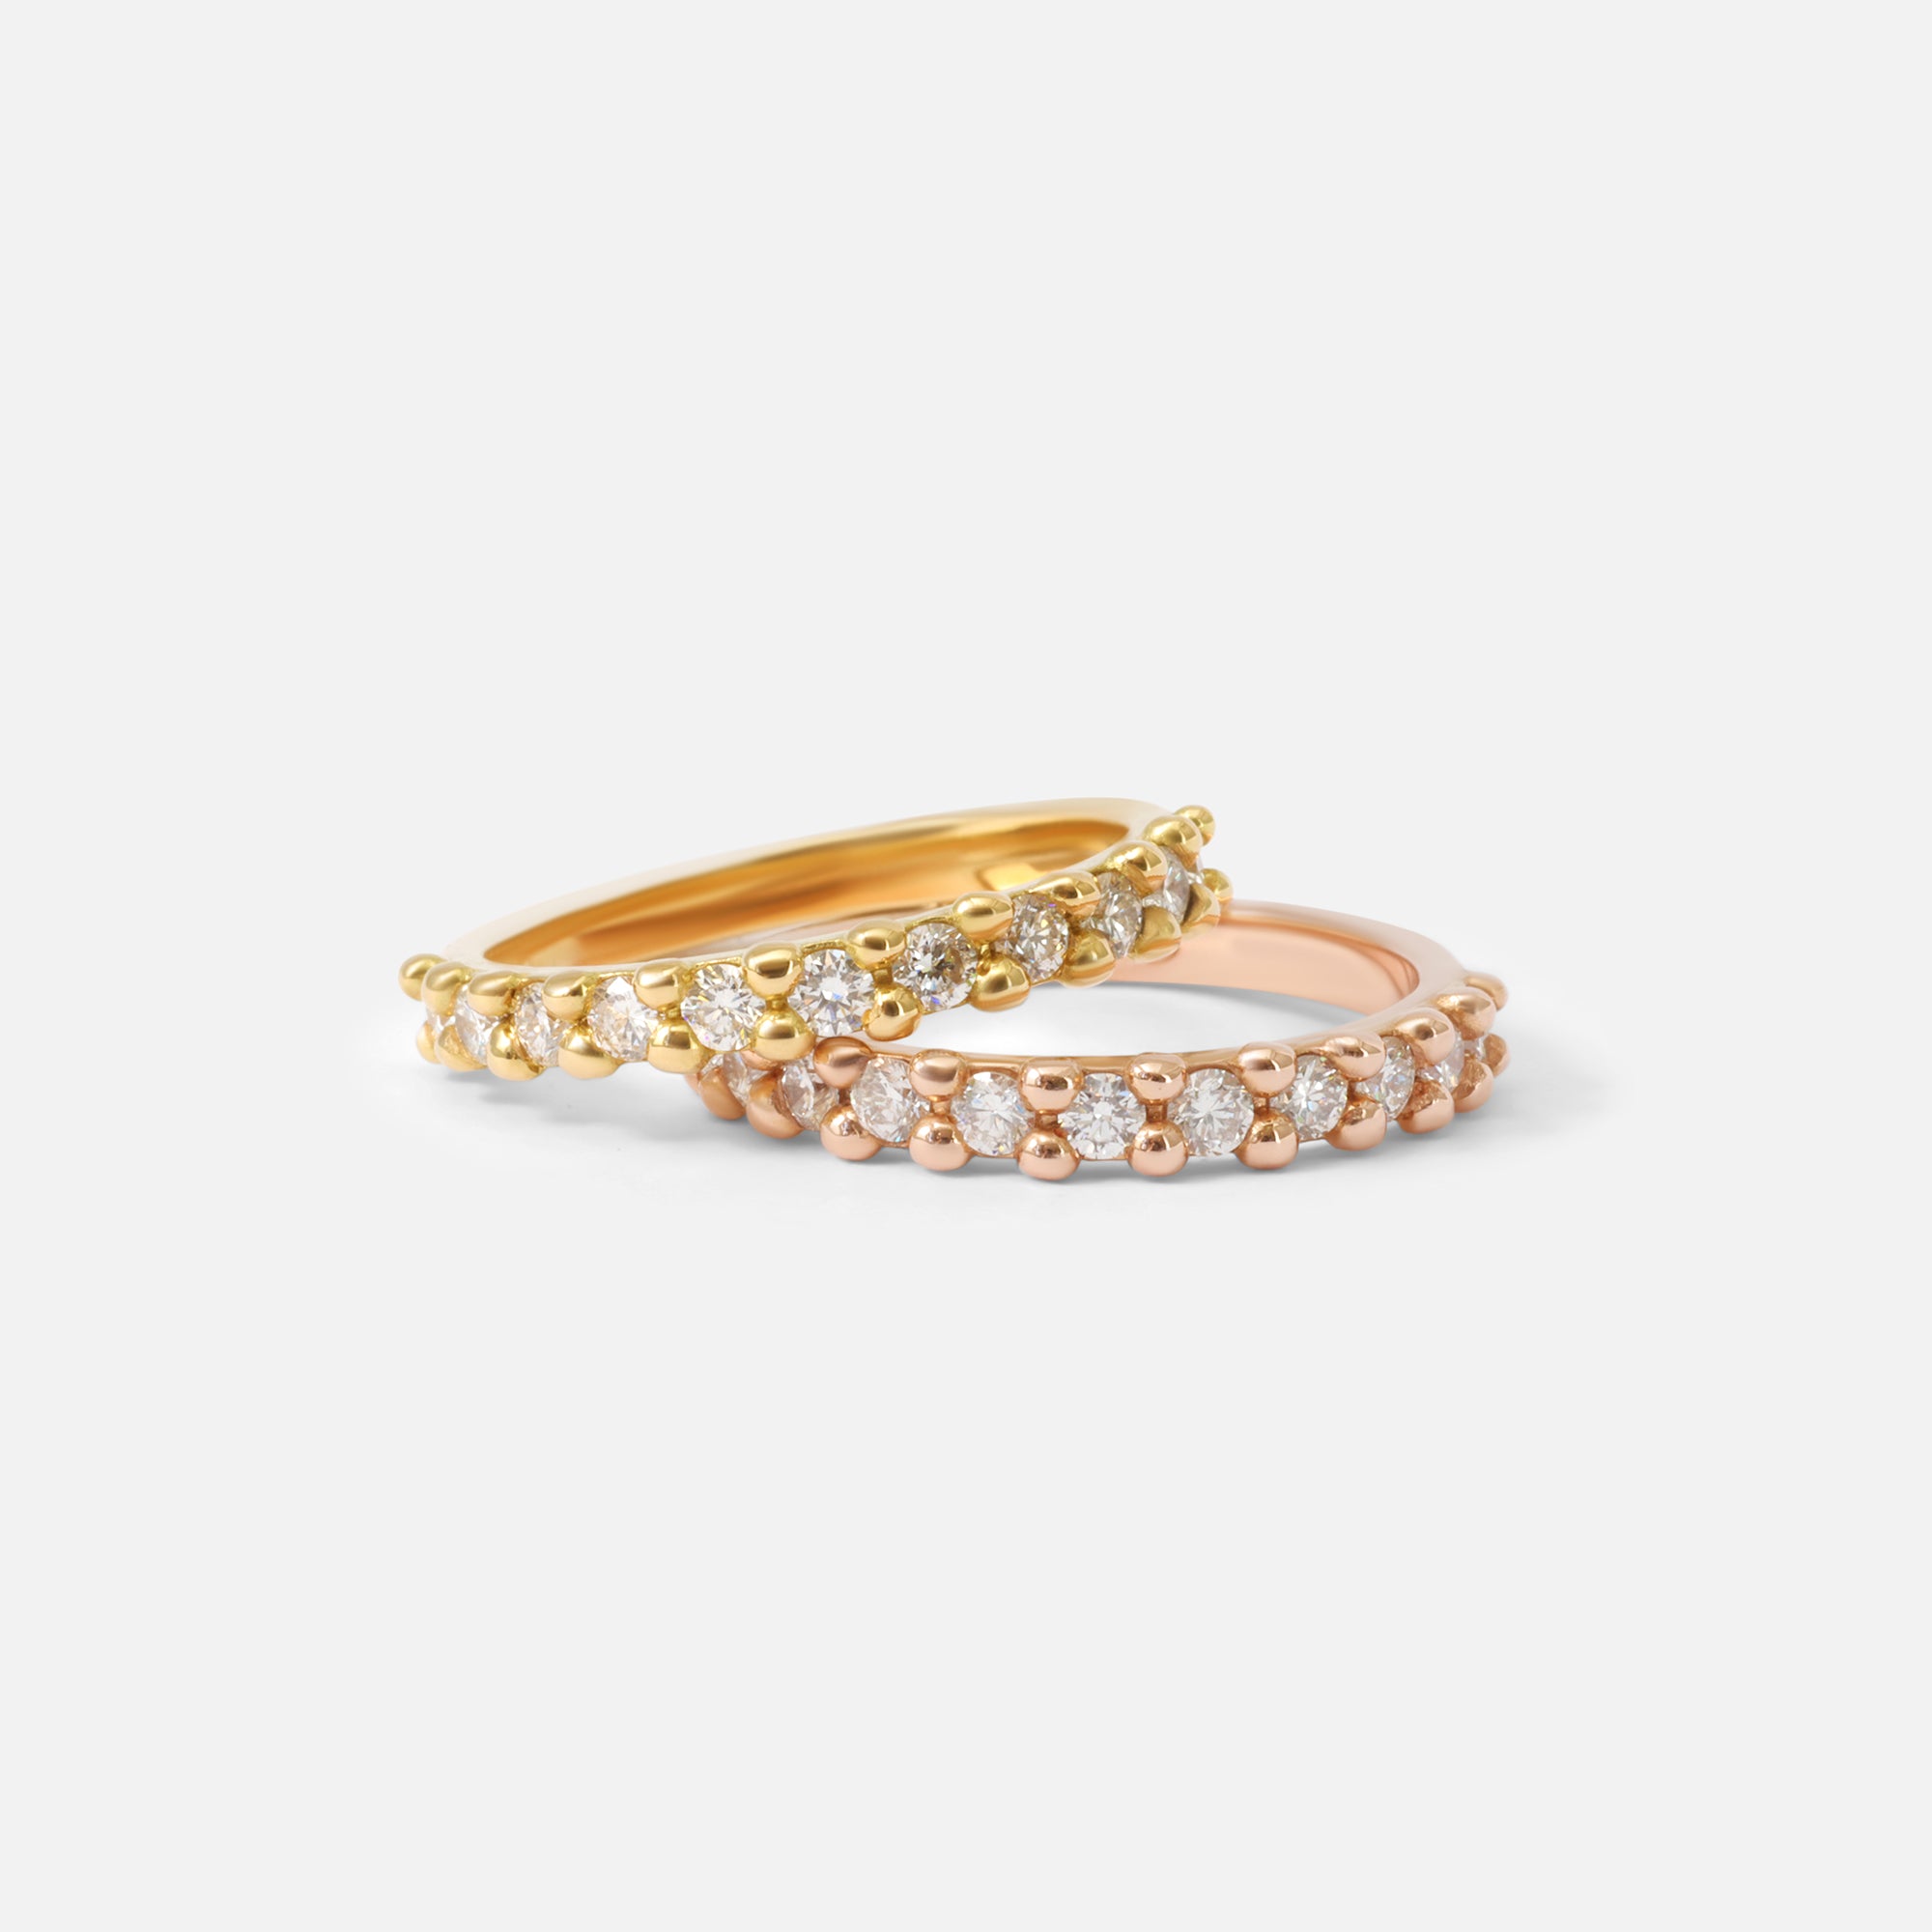 Group view of Dew / 2.3mm Brilliant Cut Diamond Ring in 14k Yellow Gold and 18k Rose Gold